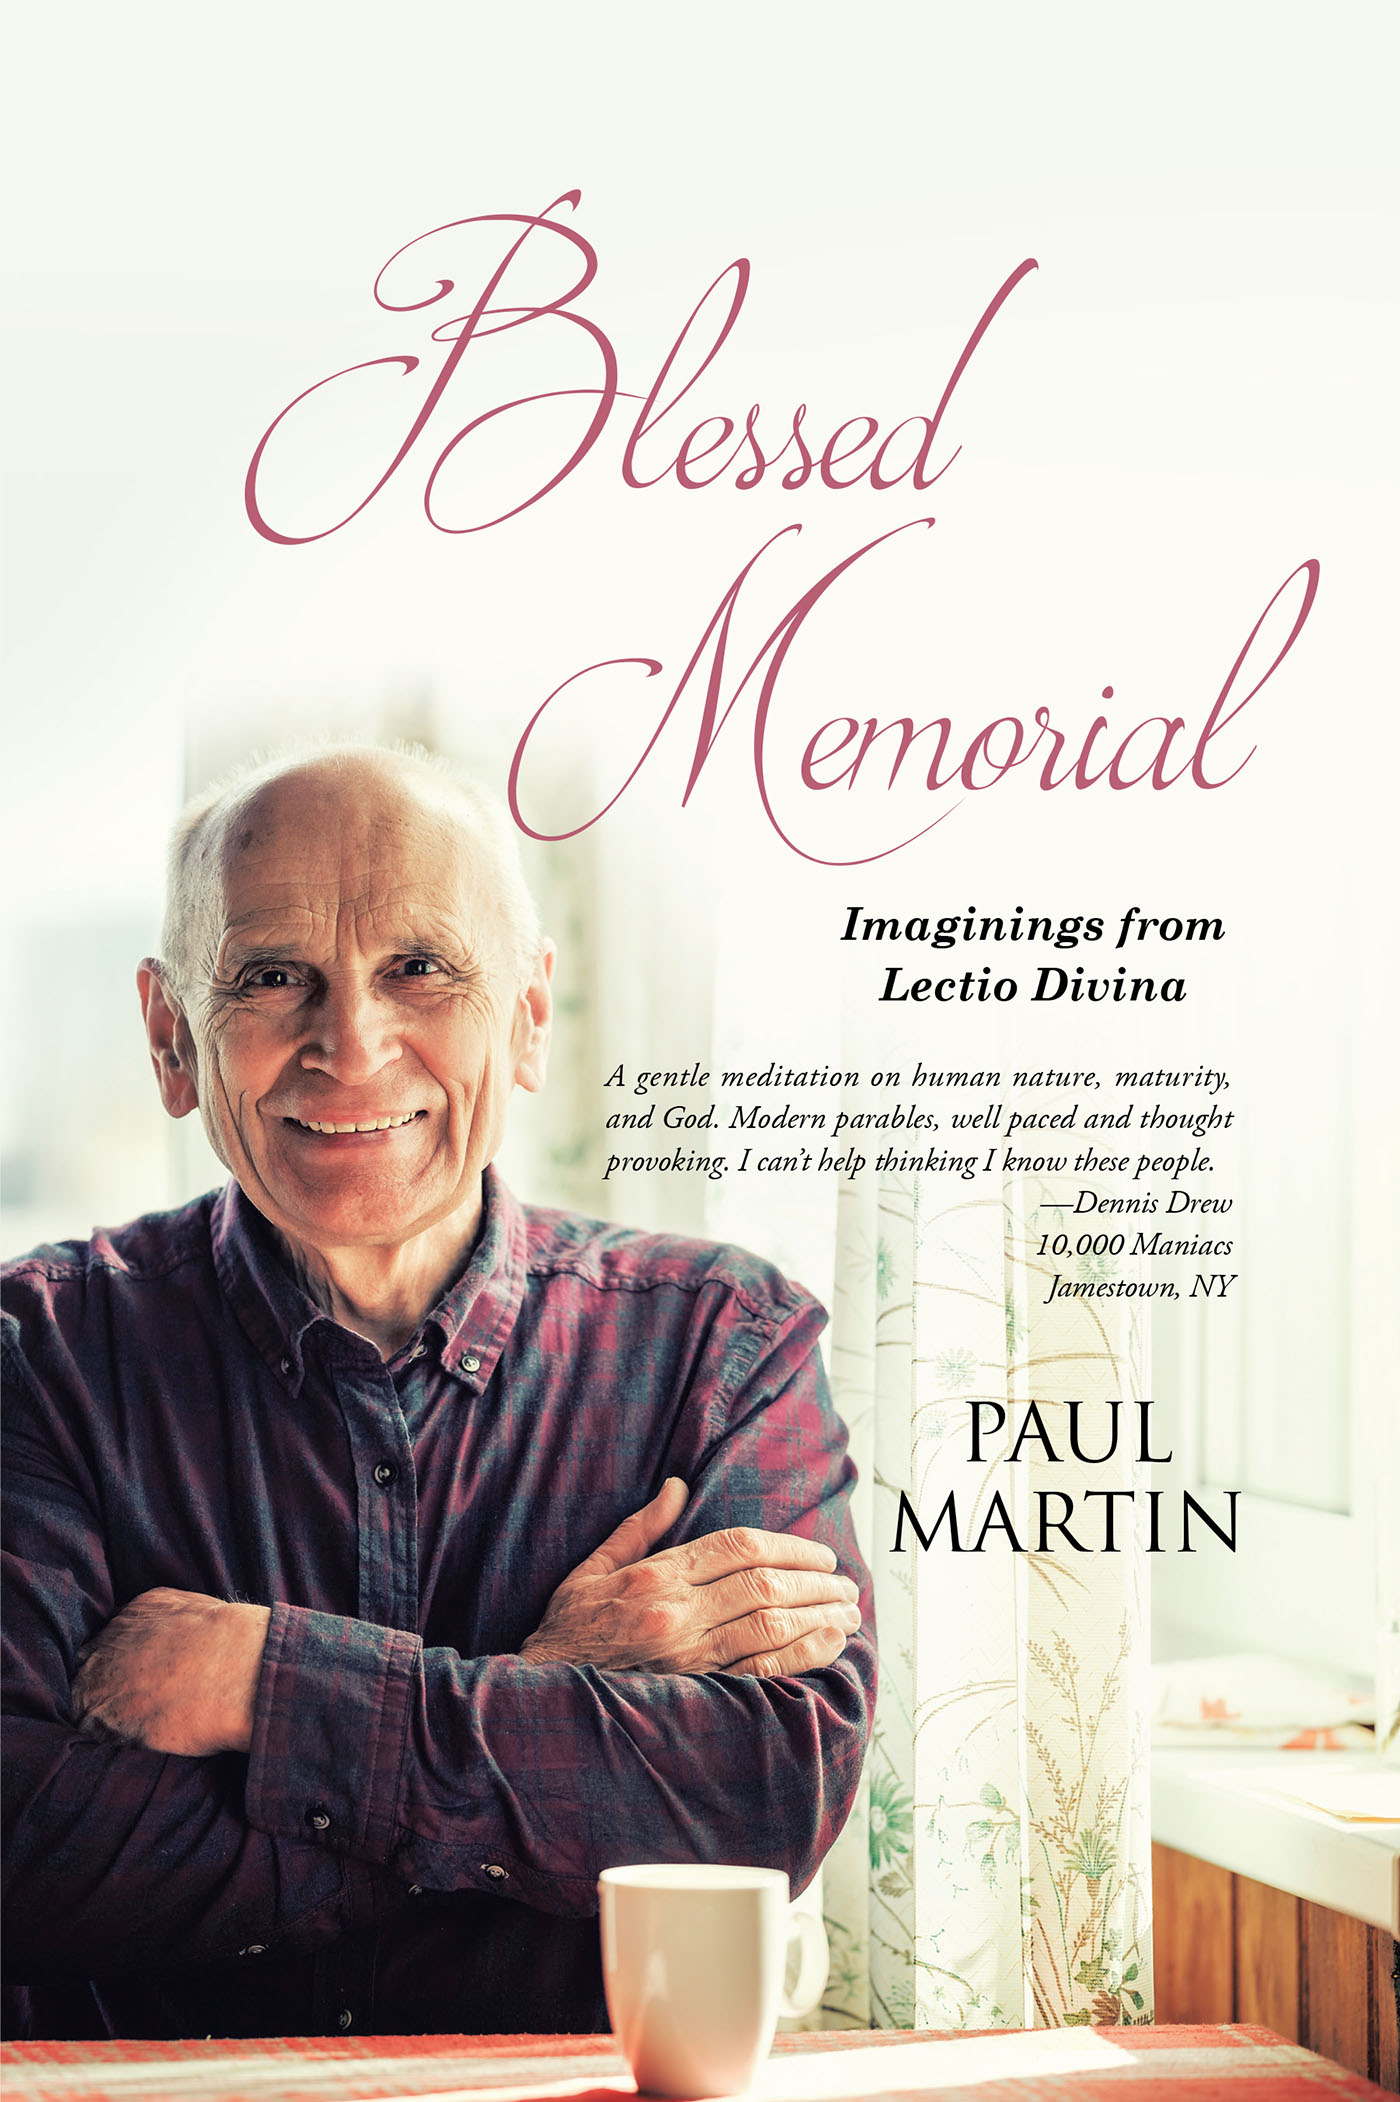 Author Paul Martin’s Book, "Blessed Memorial: Imaginings from Lectio Divina," is a Deeply Moving Exploration of the Human Condition Amid the Vicissitudes of Modern Life